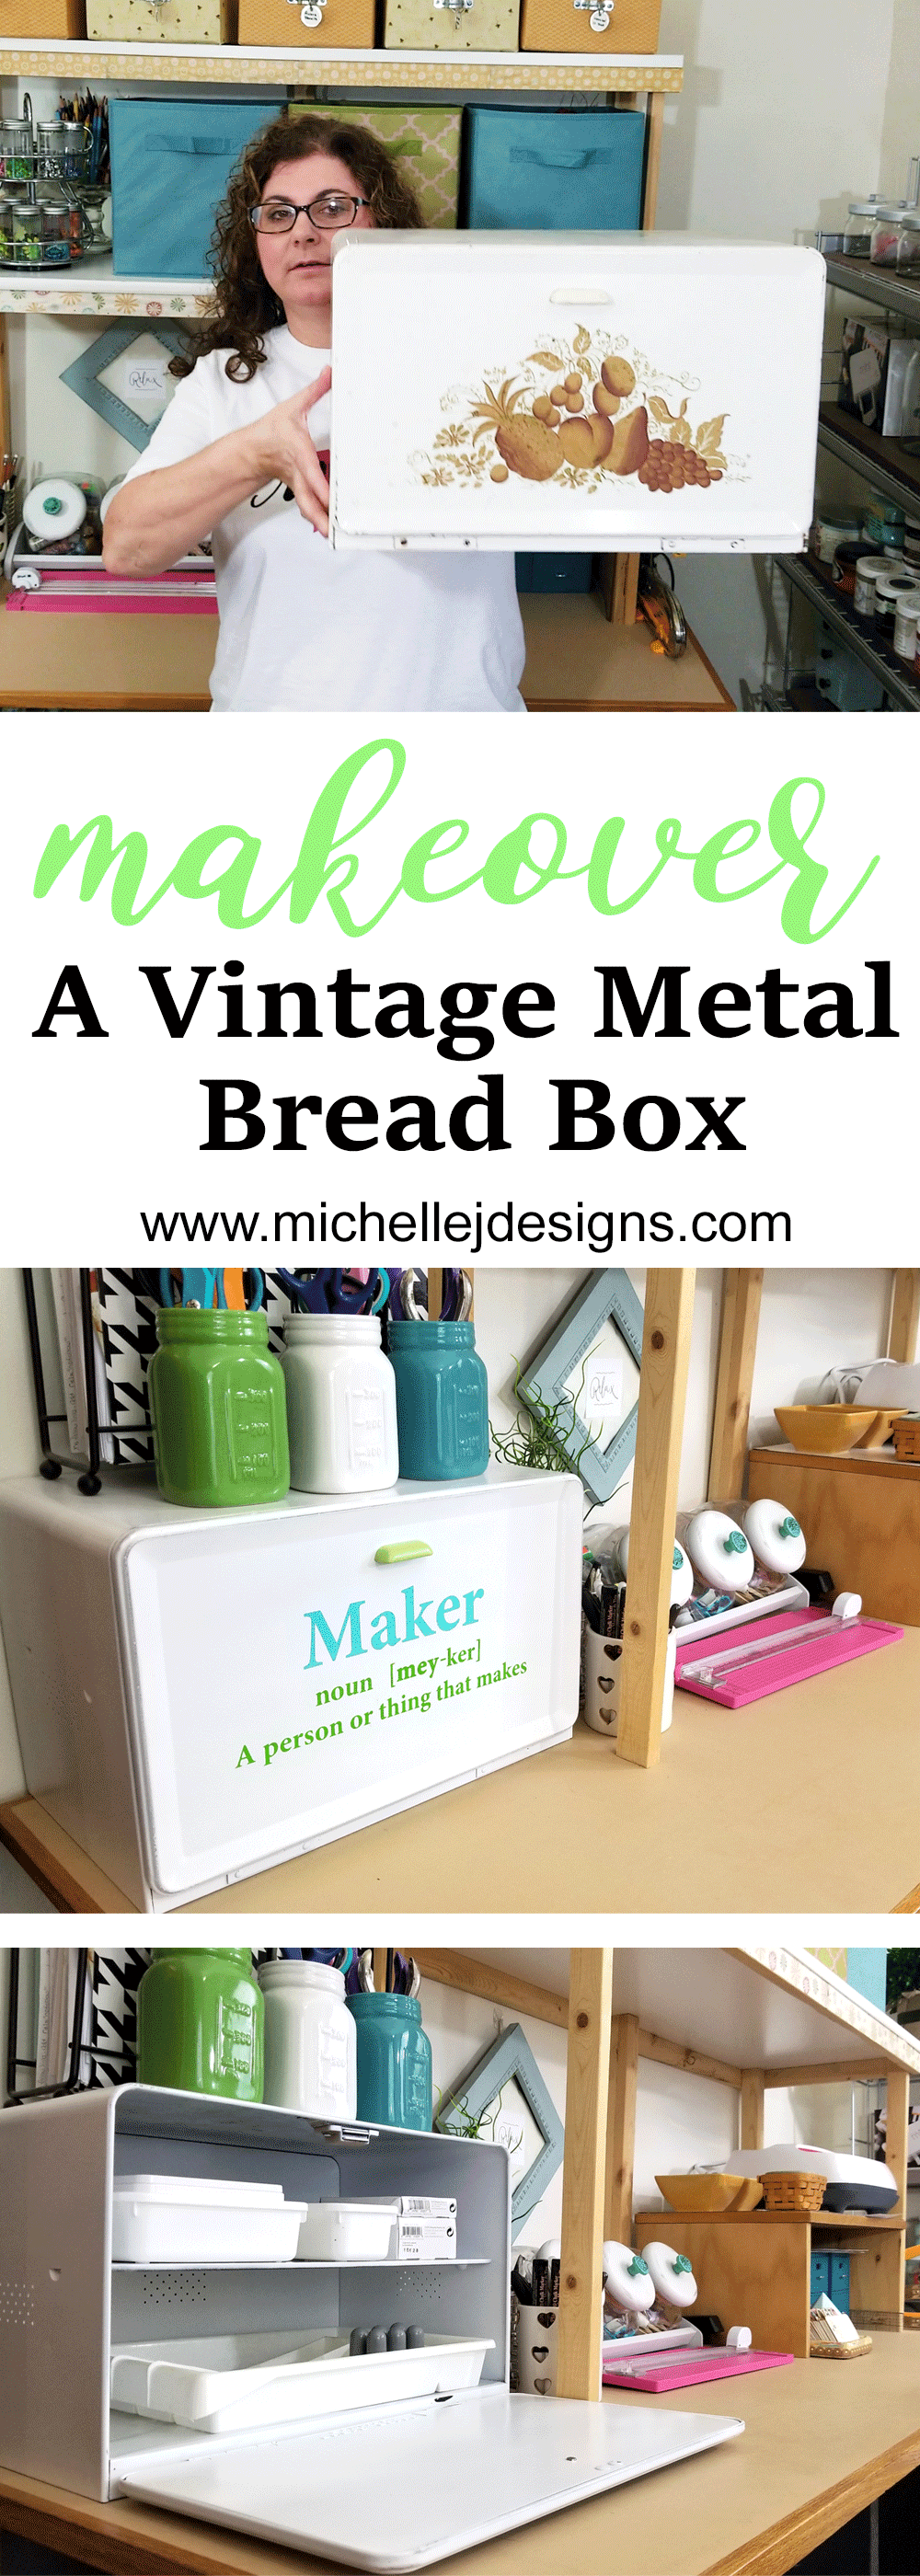 Upcycling and repurposing old items is one of my favorite things to do. This post will show you how I made over a vintage metal bread box with paint and some vinyl cut on my Silhouette Cameo. - www.michellejdesigns.com - #michellejdesigns #repurposeit #thriftstoreupcyle #DIY #StyleTechCraft